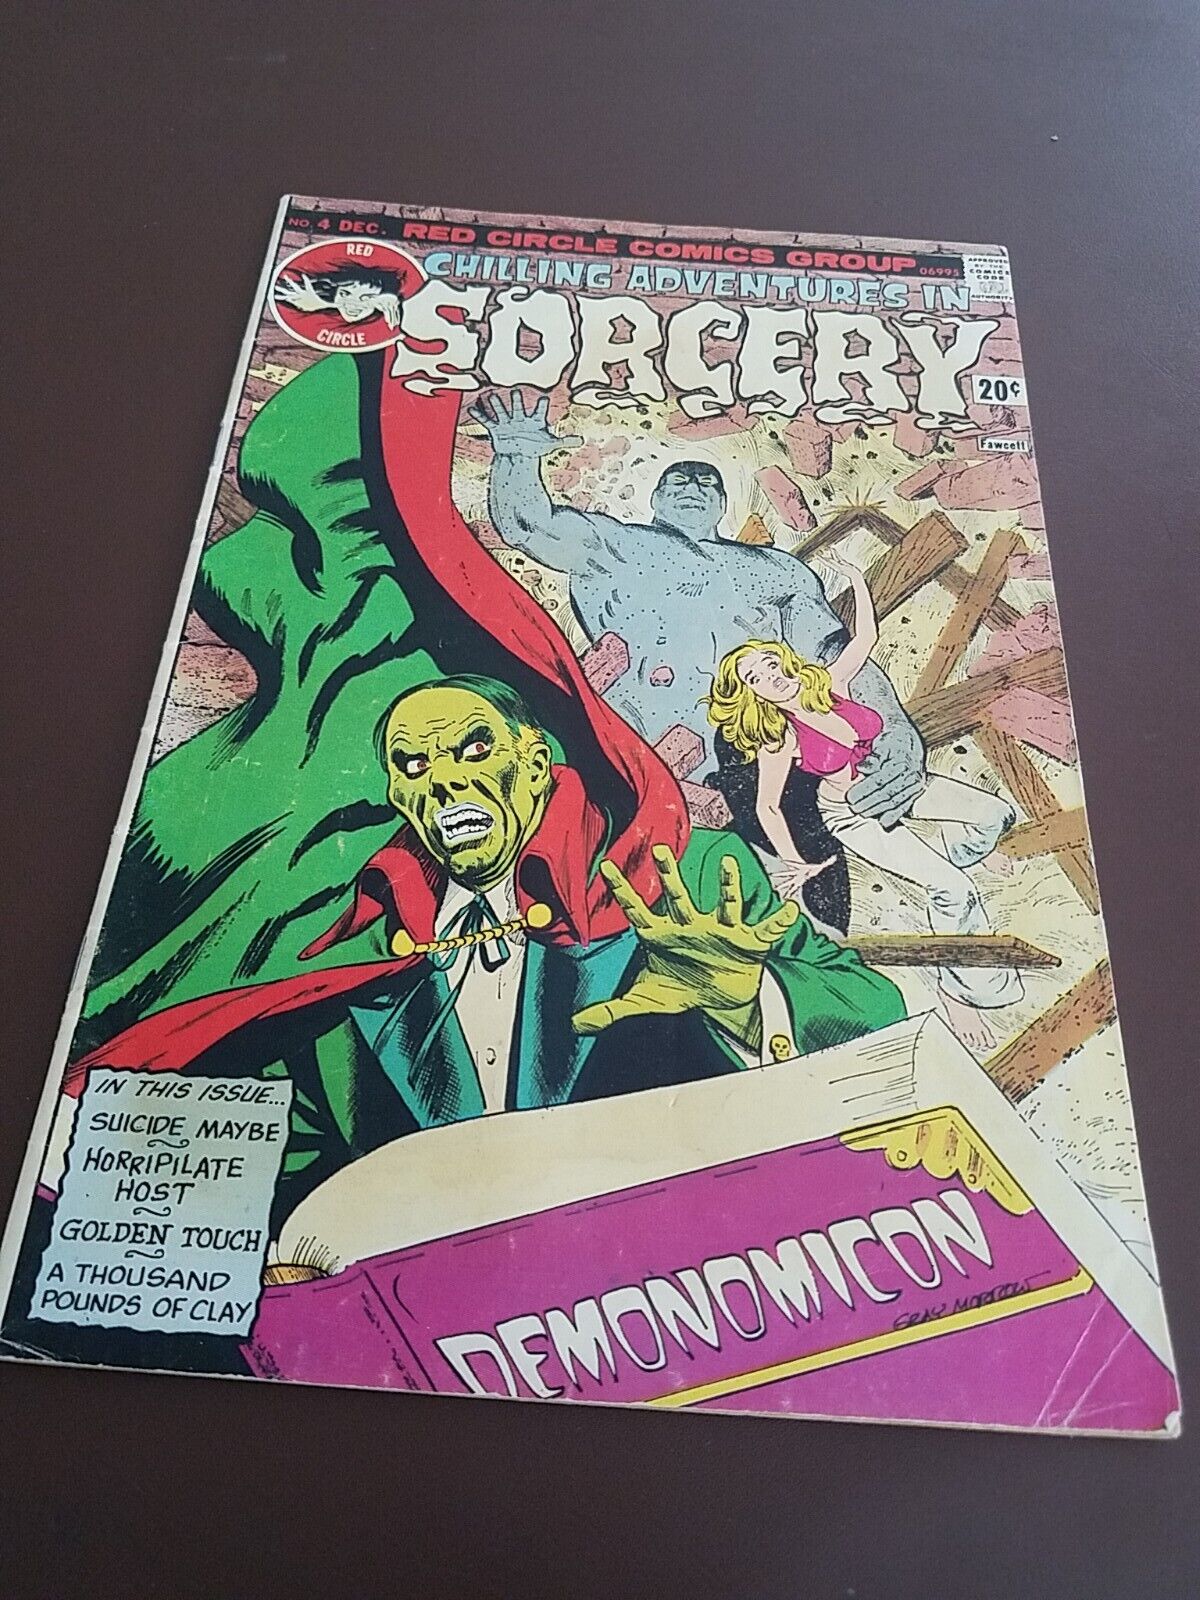 CHILLING ADVENTURES IN SORCERY #4, DECEMBER 1973 GOOD CONDITION GREAT ART 